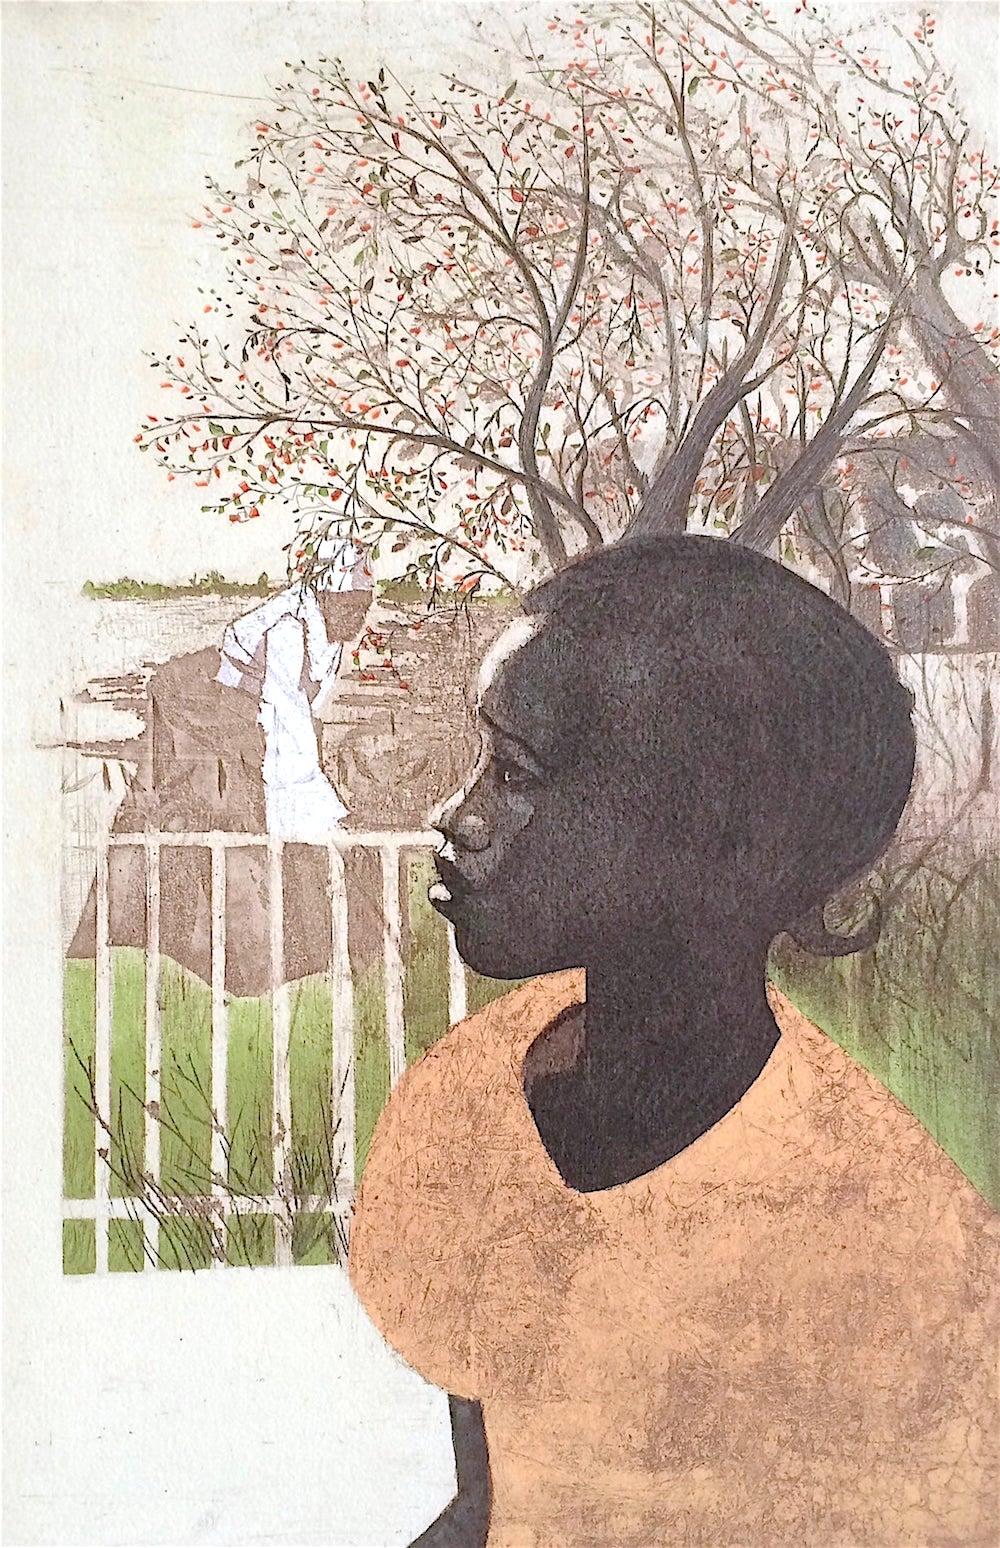 NEW DREAMS Signed Lithograph, Black History, African American Women - Print by Ernest Crichlow